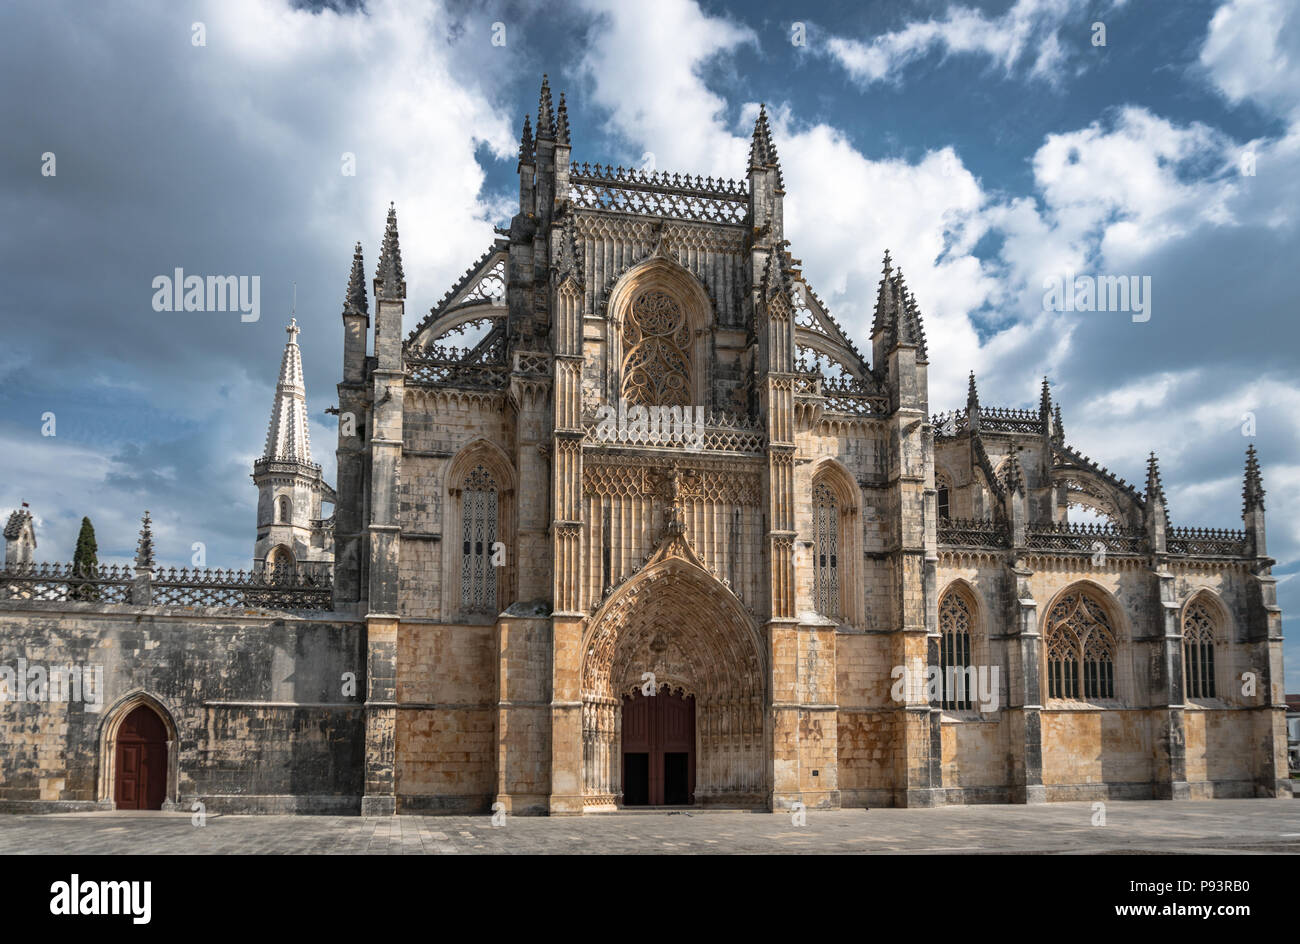 Late gothic and manueline architecture of Batalha Monastery Portugal. Stock Photo